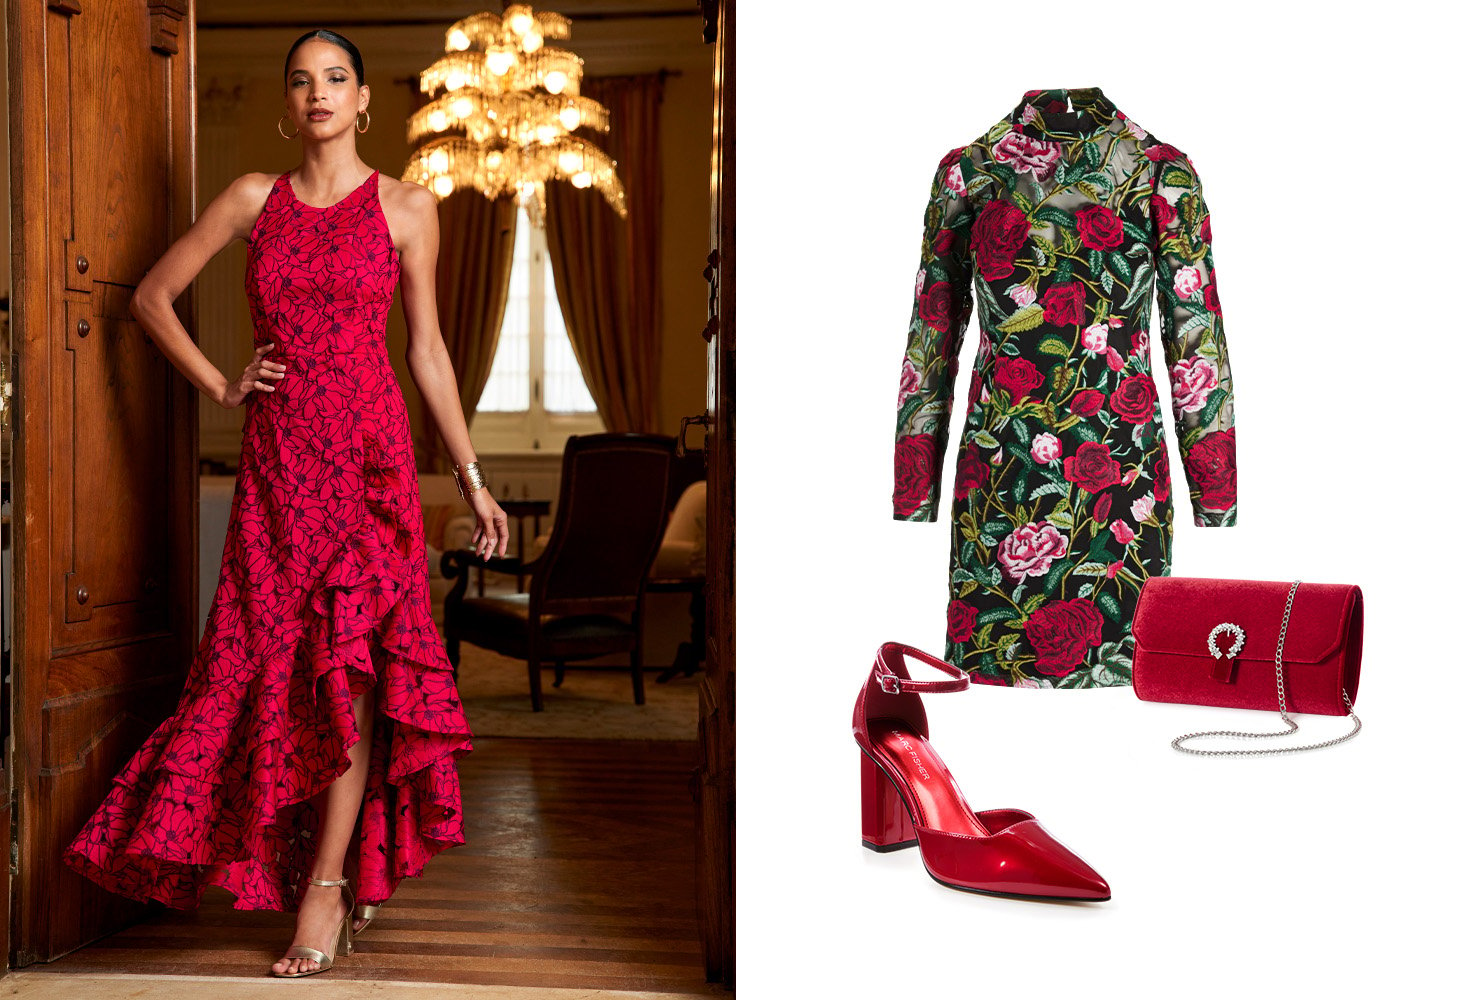 Model wearing red ruffle and lace dress with strappy gold heels. Winter floral long sleeve sheath dress with racing red clutch and metallic pointed heel.